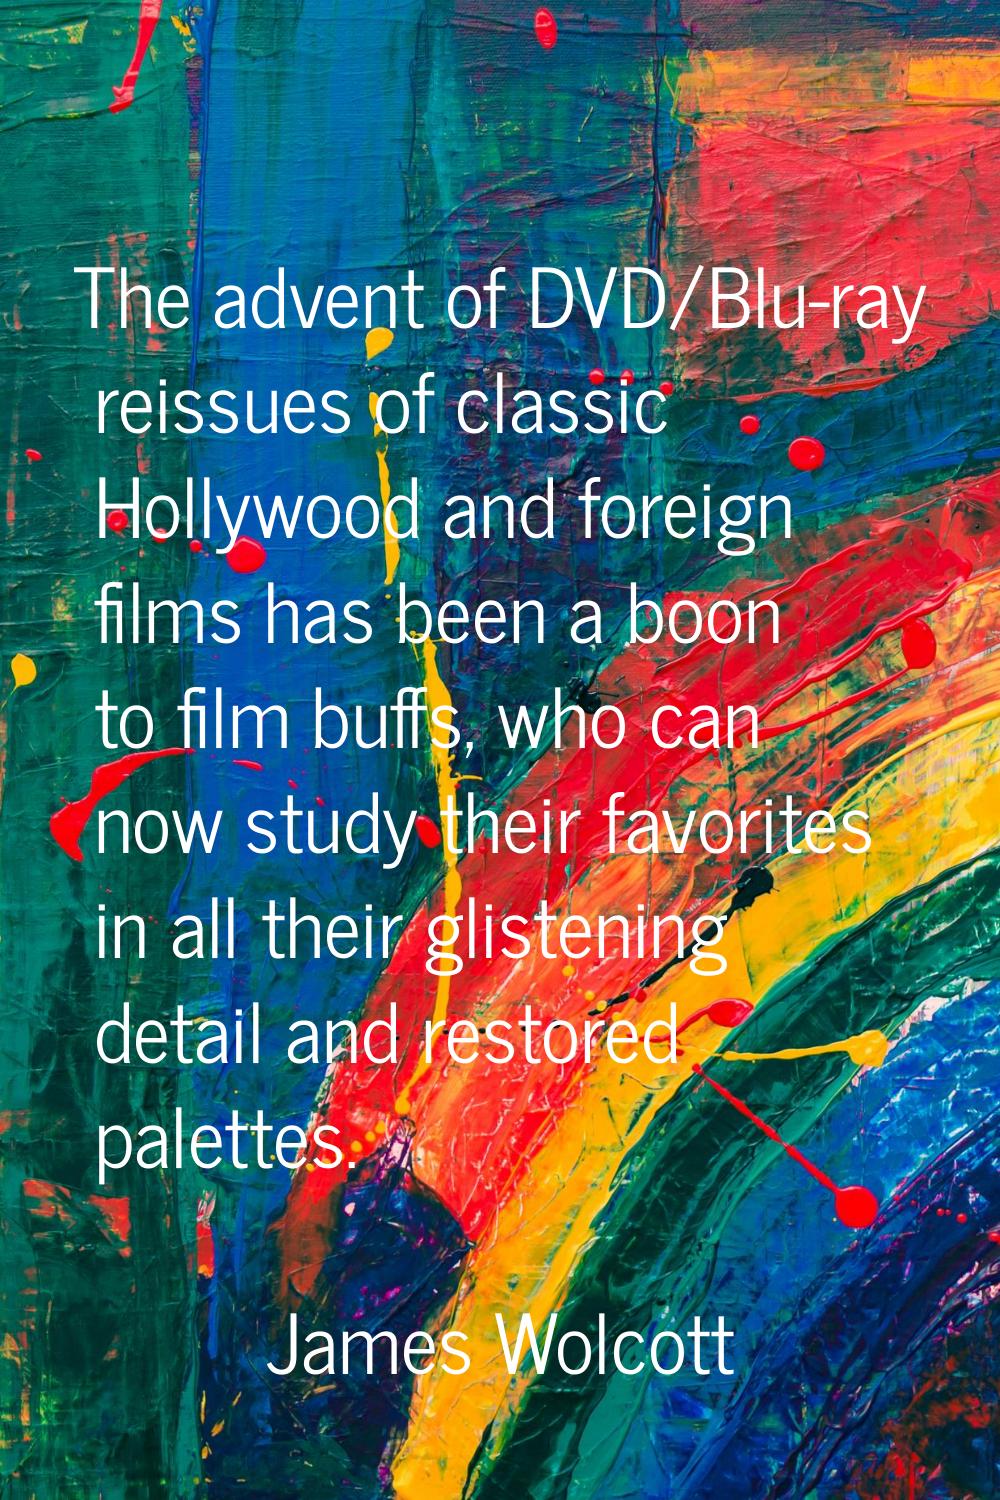 The advent of DVD/Blu-ray reissues of classic Hollywood and foreign films has been a boon to film b